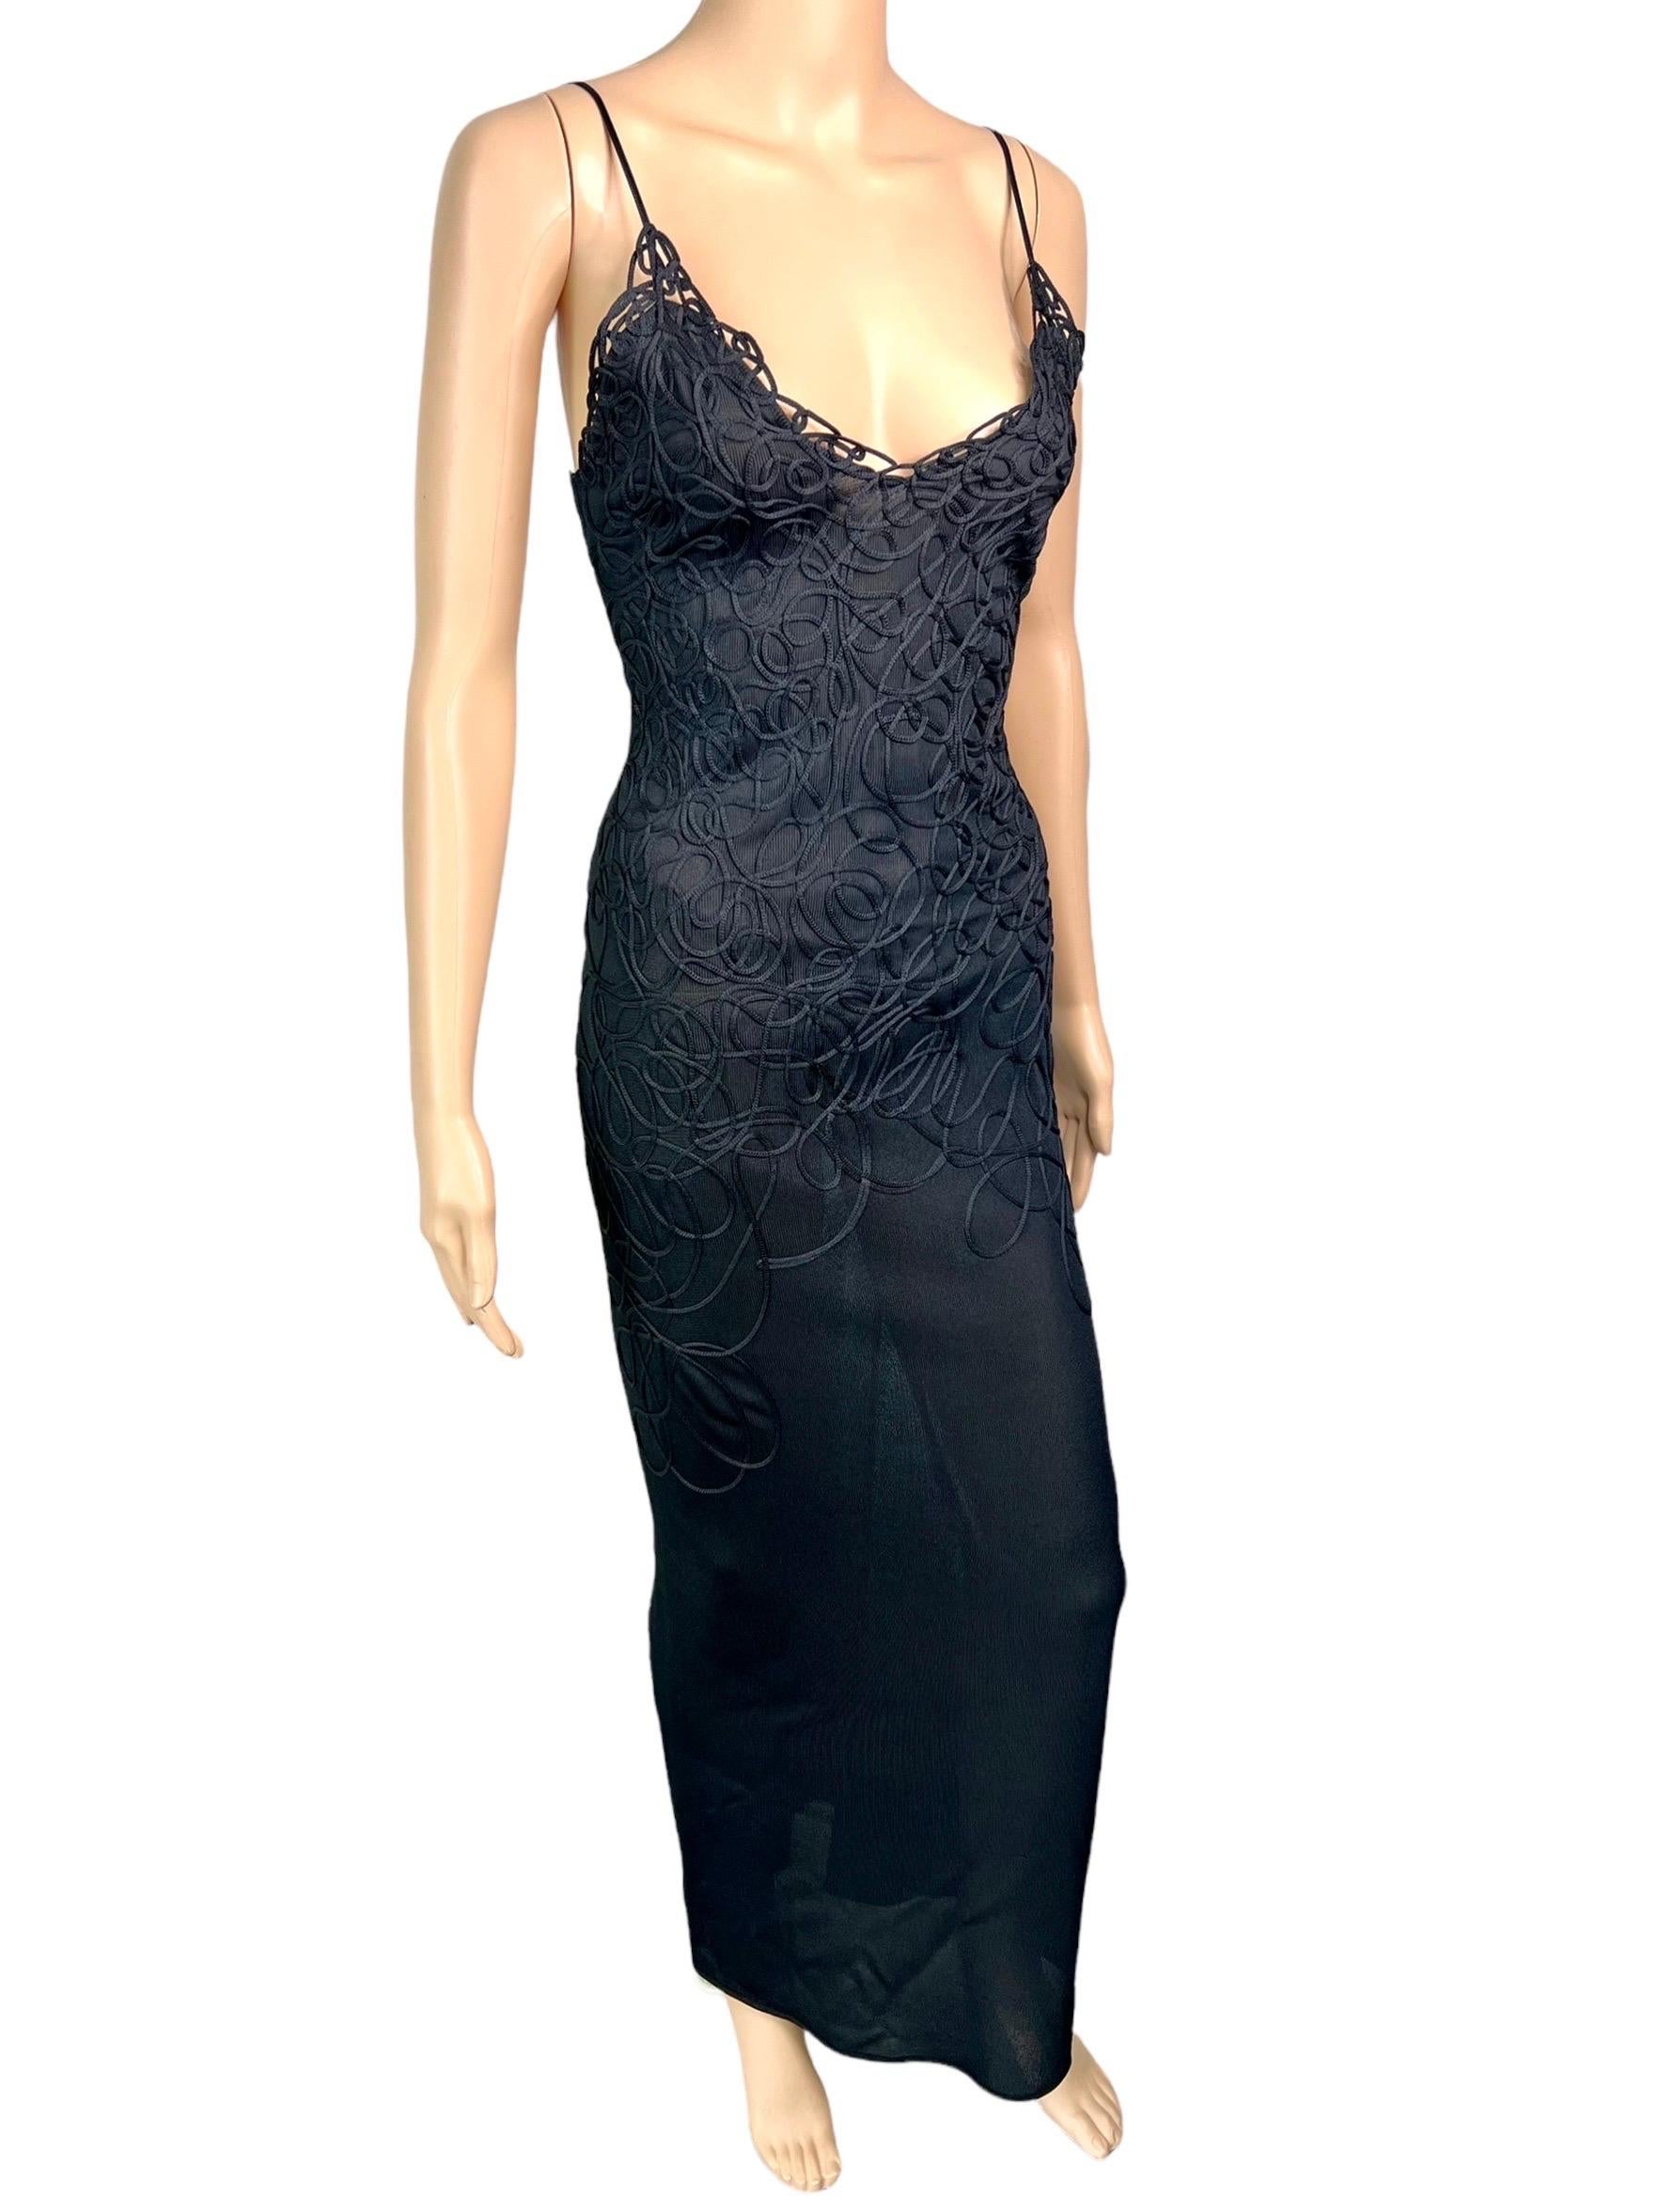 Thierry Mugler Vintage Embroidered Semi-Sheer Knit Bodycon Black Maxi Dress  6